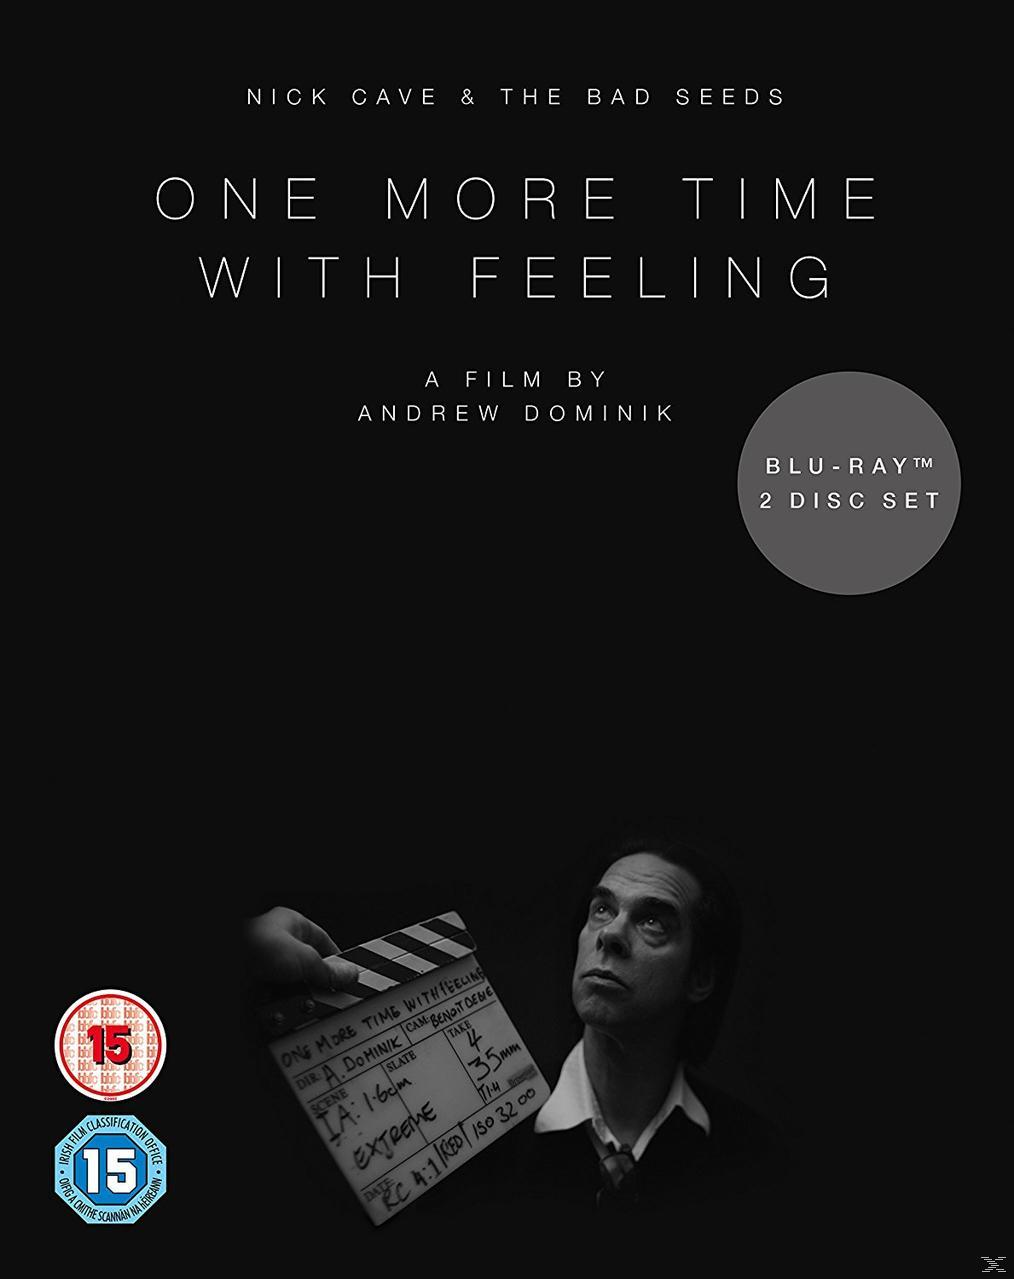 Nick Cave & The Bad With Time (Blu-ray) Feeling (2x Seeds Blu-Ray) One - More 